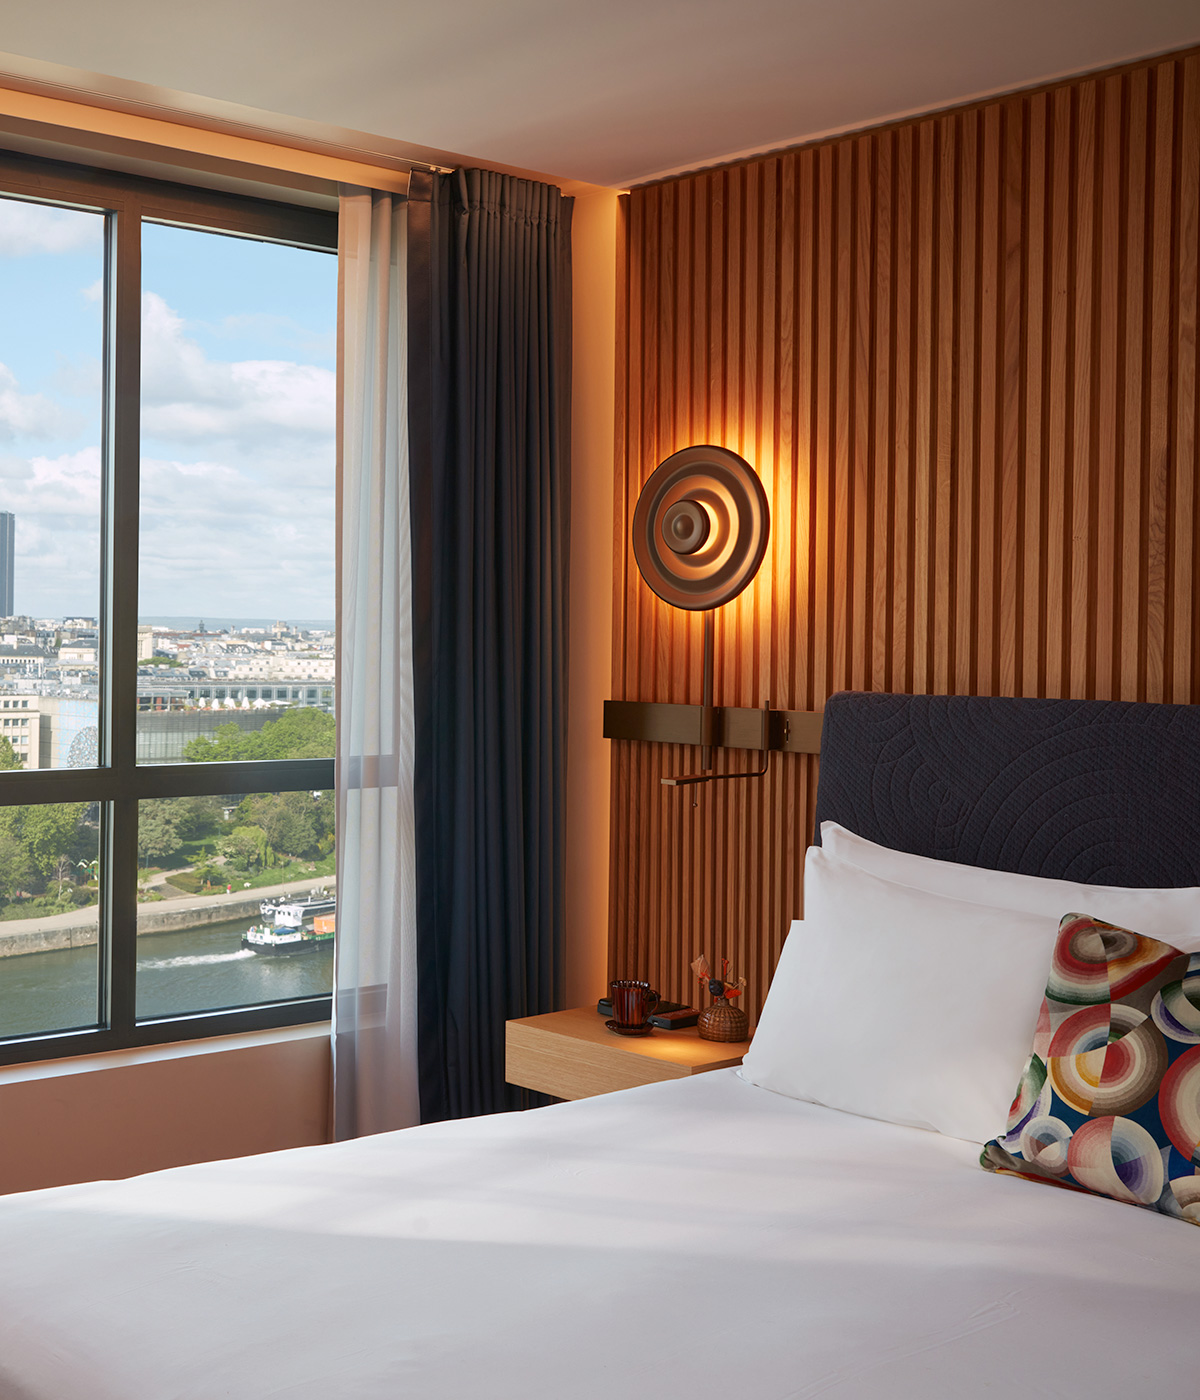 Interior of the iconic Paris skyline room including sunny city view and soft pillows.